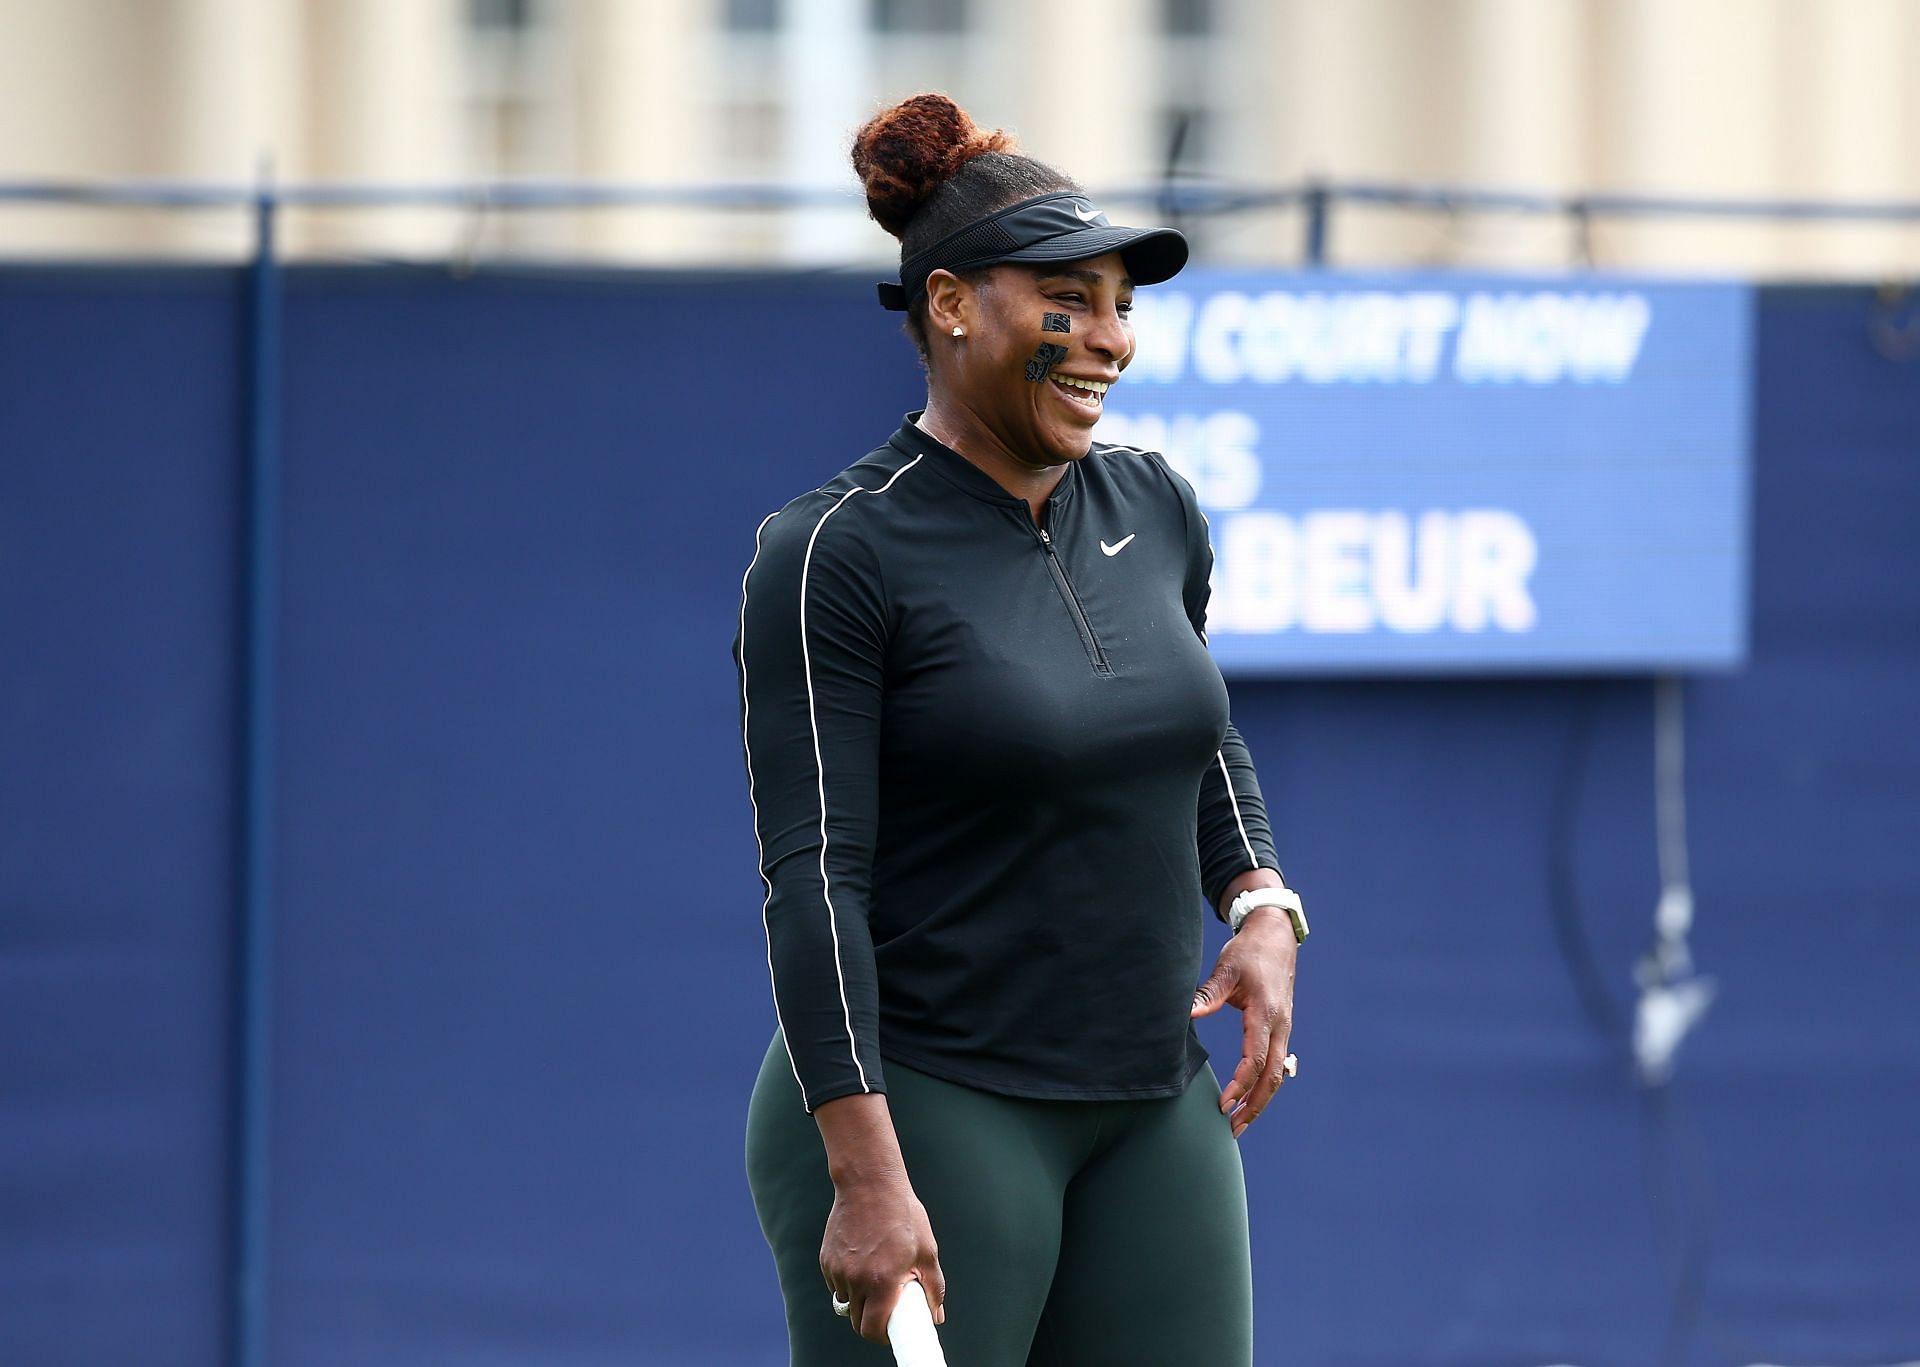 Serena Williams shares a giggle during a practice session in 2022